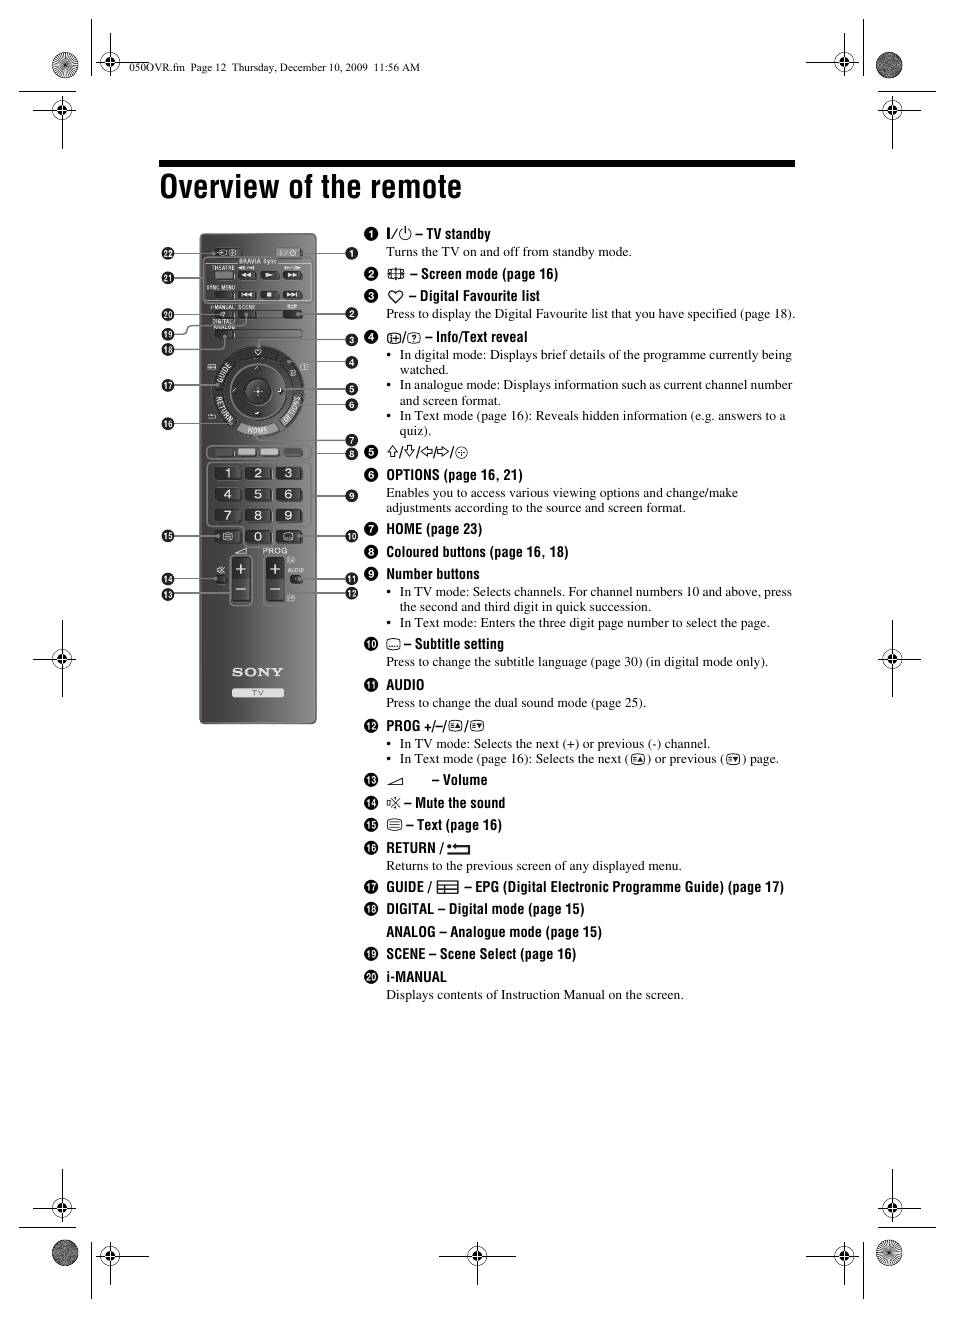 050ovr, Overview of the remote | Sony BRAVIA KDL-22EX3xx User Manual | Page 12 / 39